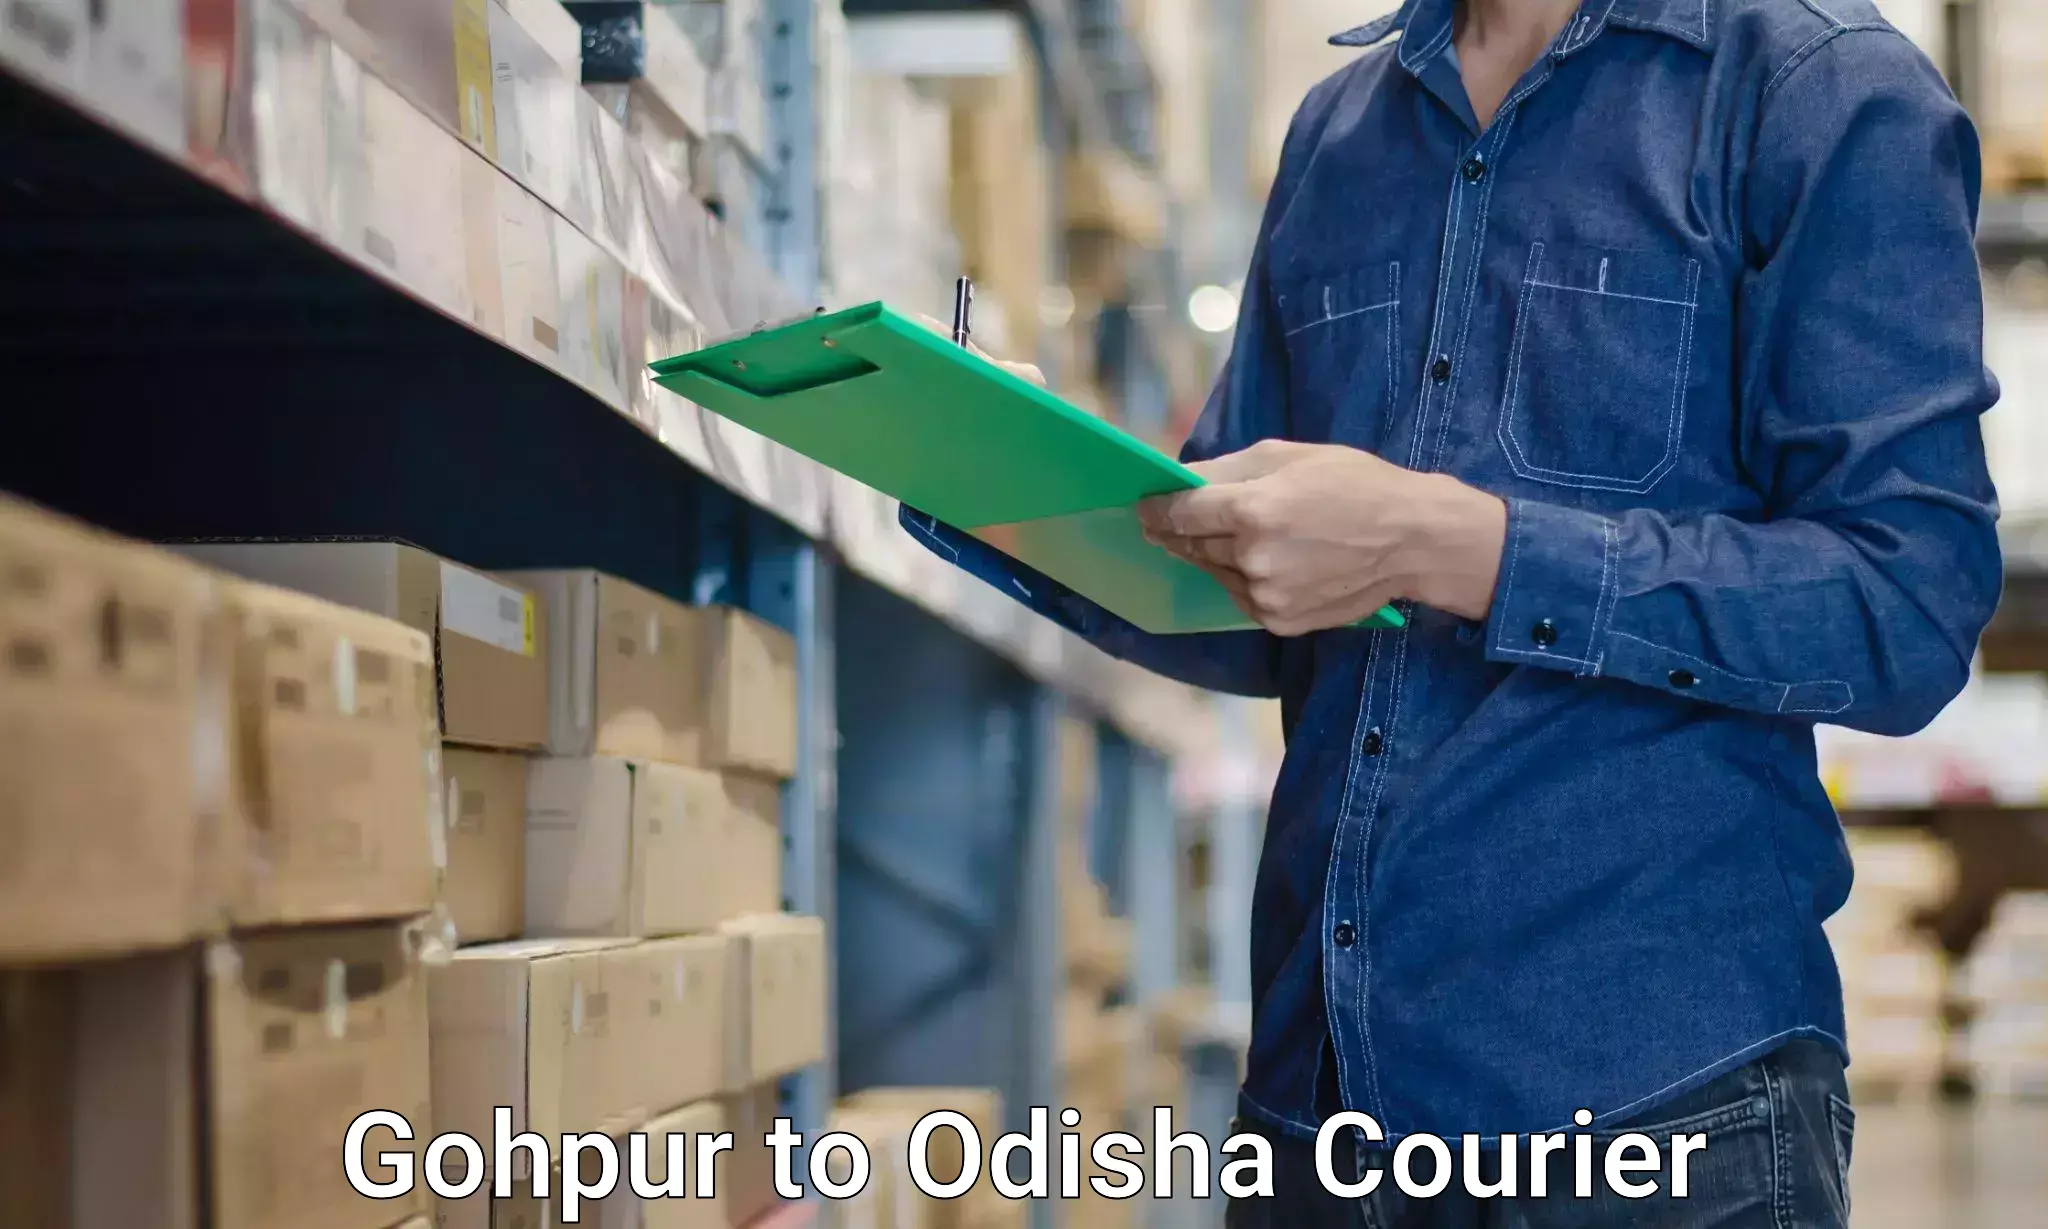 Hassle-free relocation Gohpur to Raighar